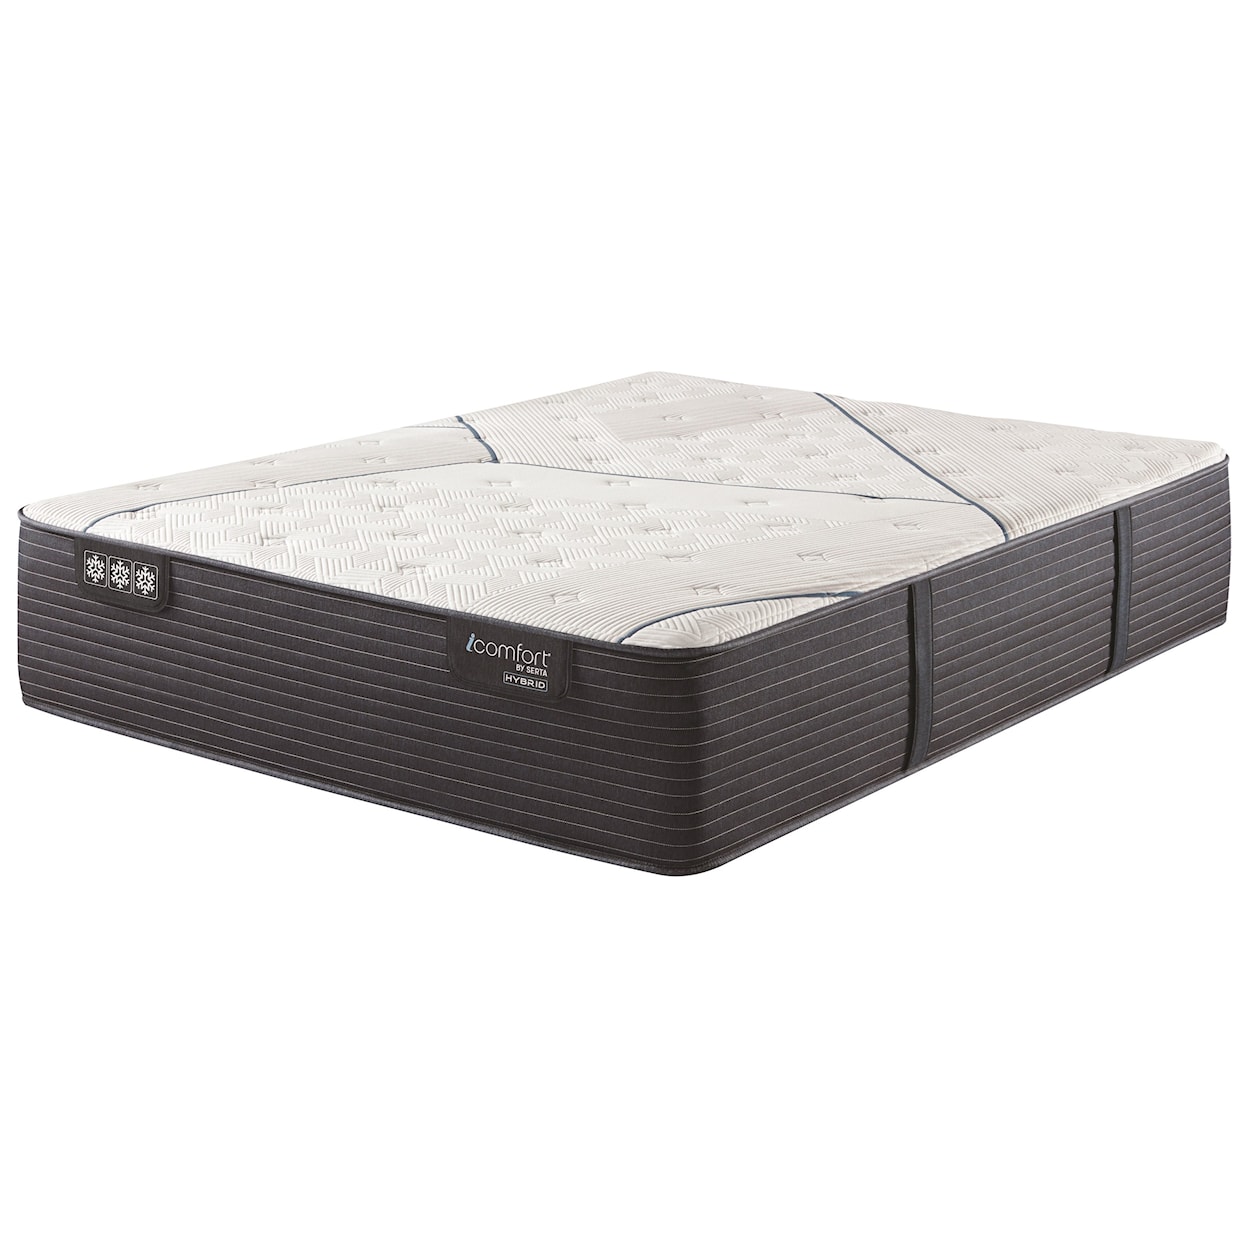 Serta CF4000 Quilted Hybrid II Extra Firm Cal King 14 3/4" Extra Firm Hybrid Mattress